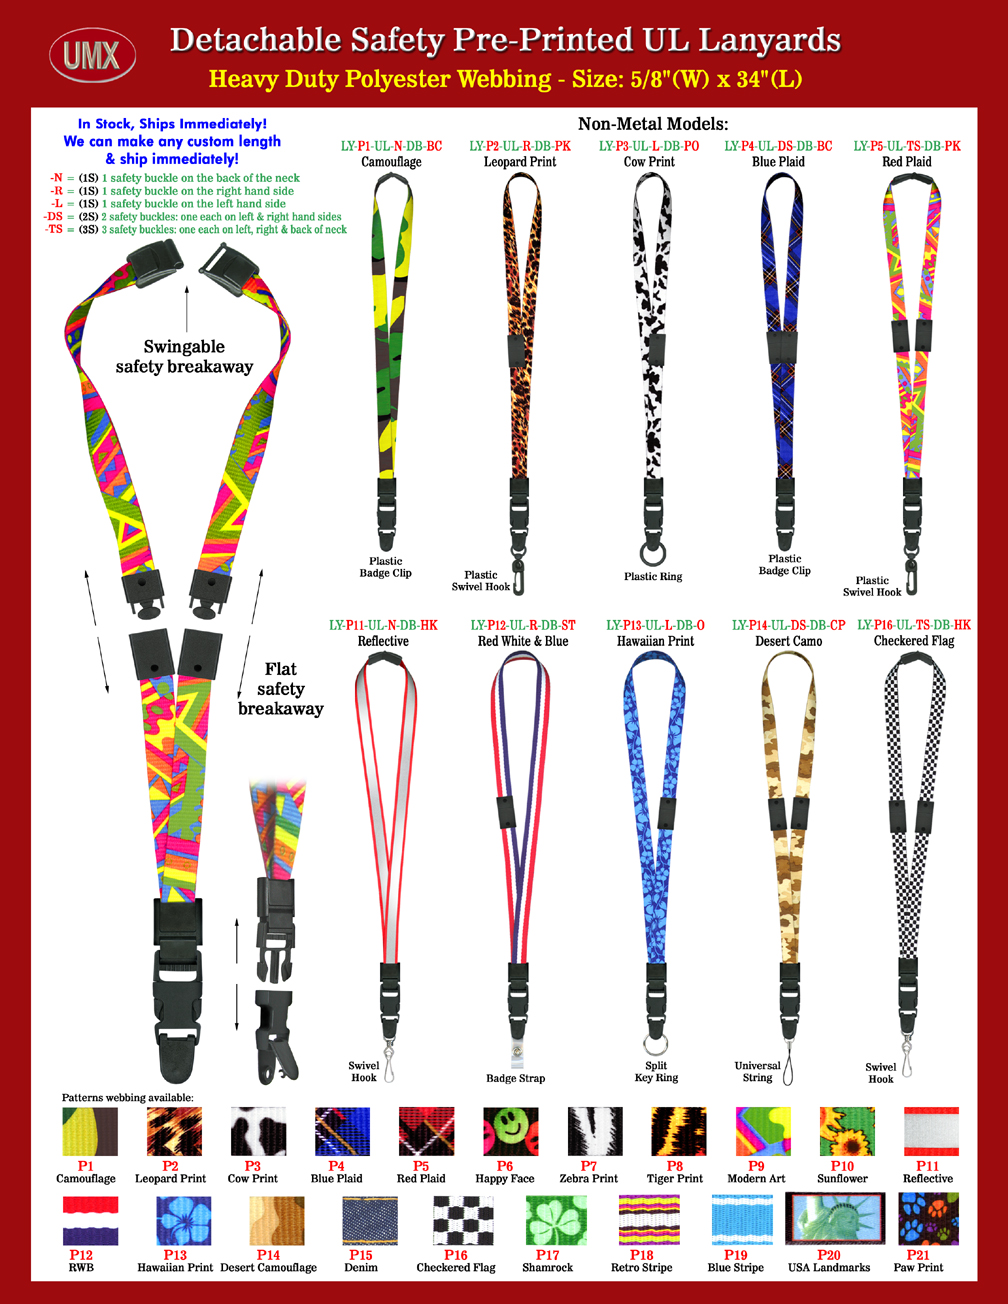 Universal Link: 5/8" Pre-Printed Theme Quick Release Safety Neck Lanyards.